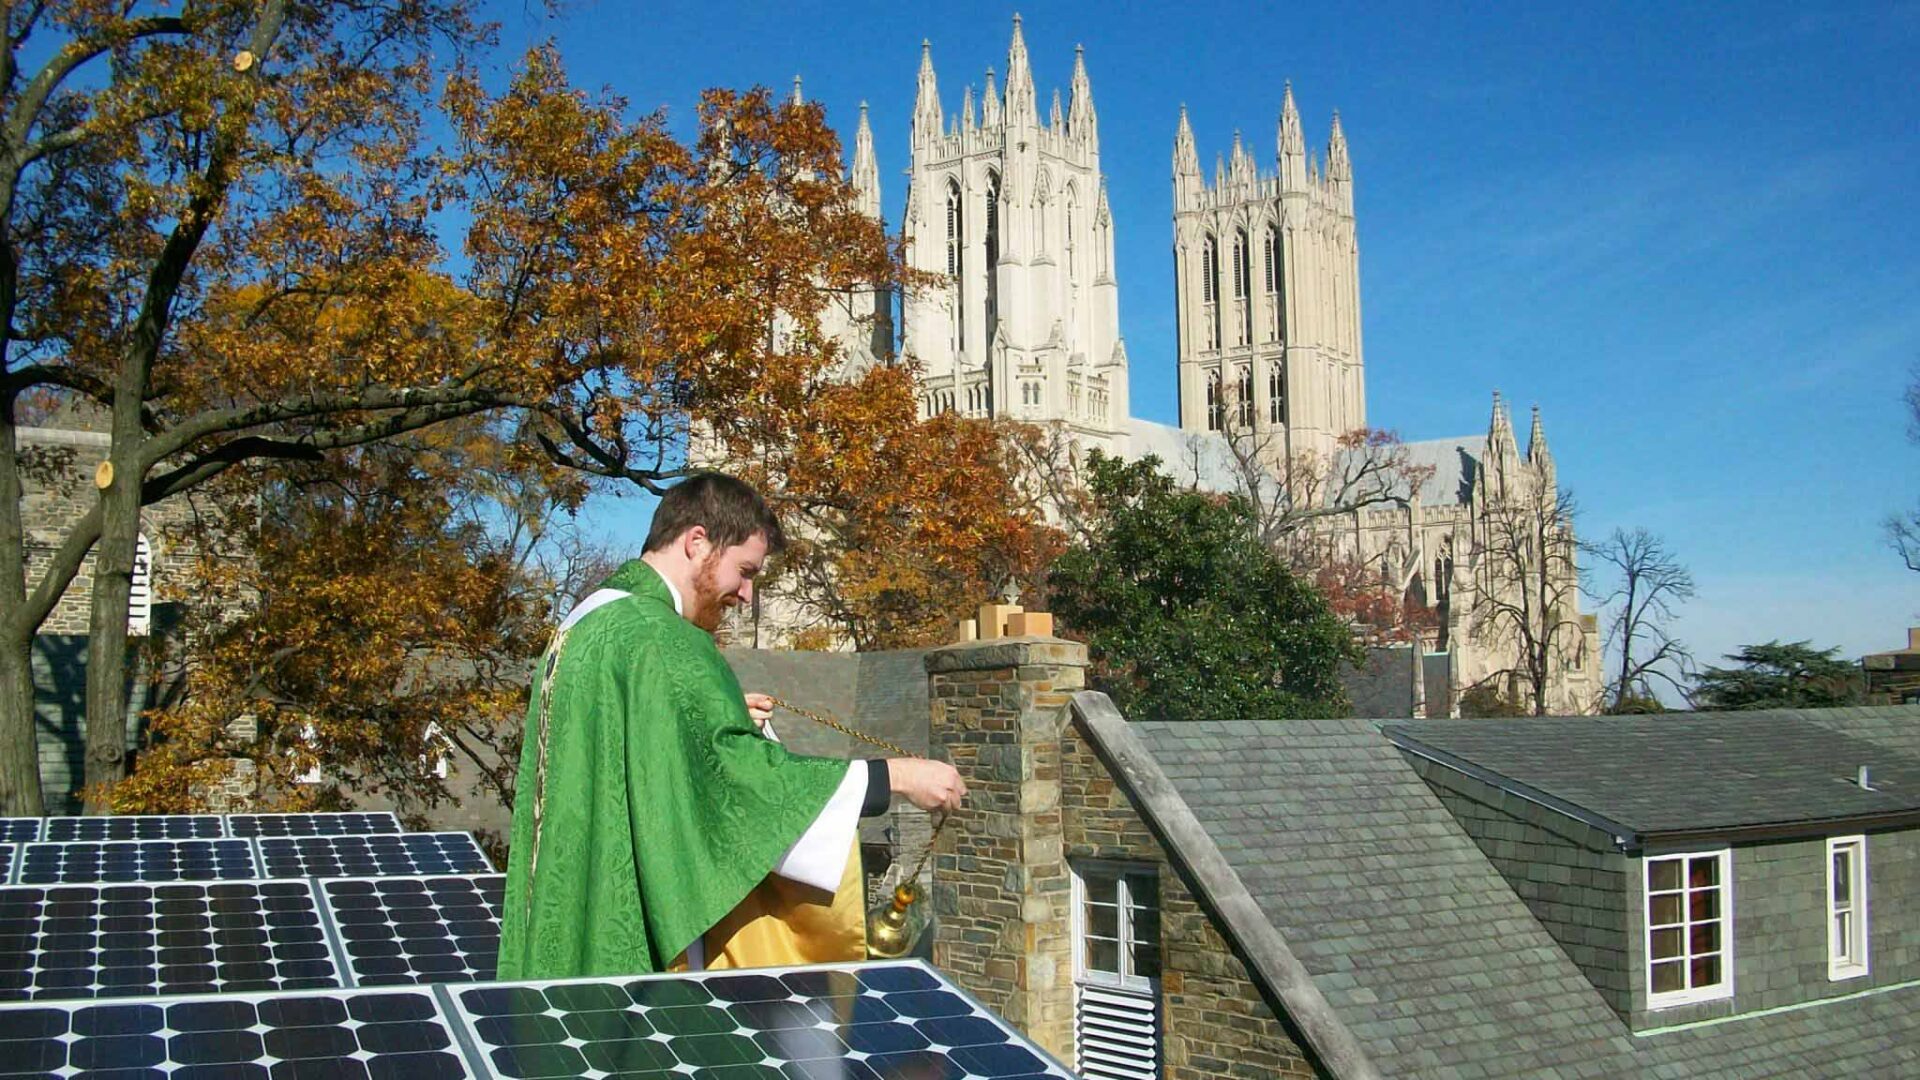 An Episcopal priest burns incense over a row of solar panels. A large cathedral is in the background.